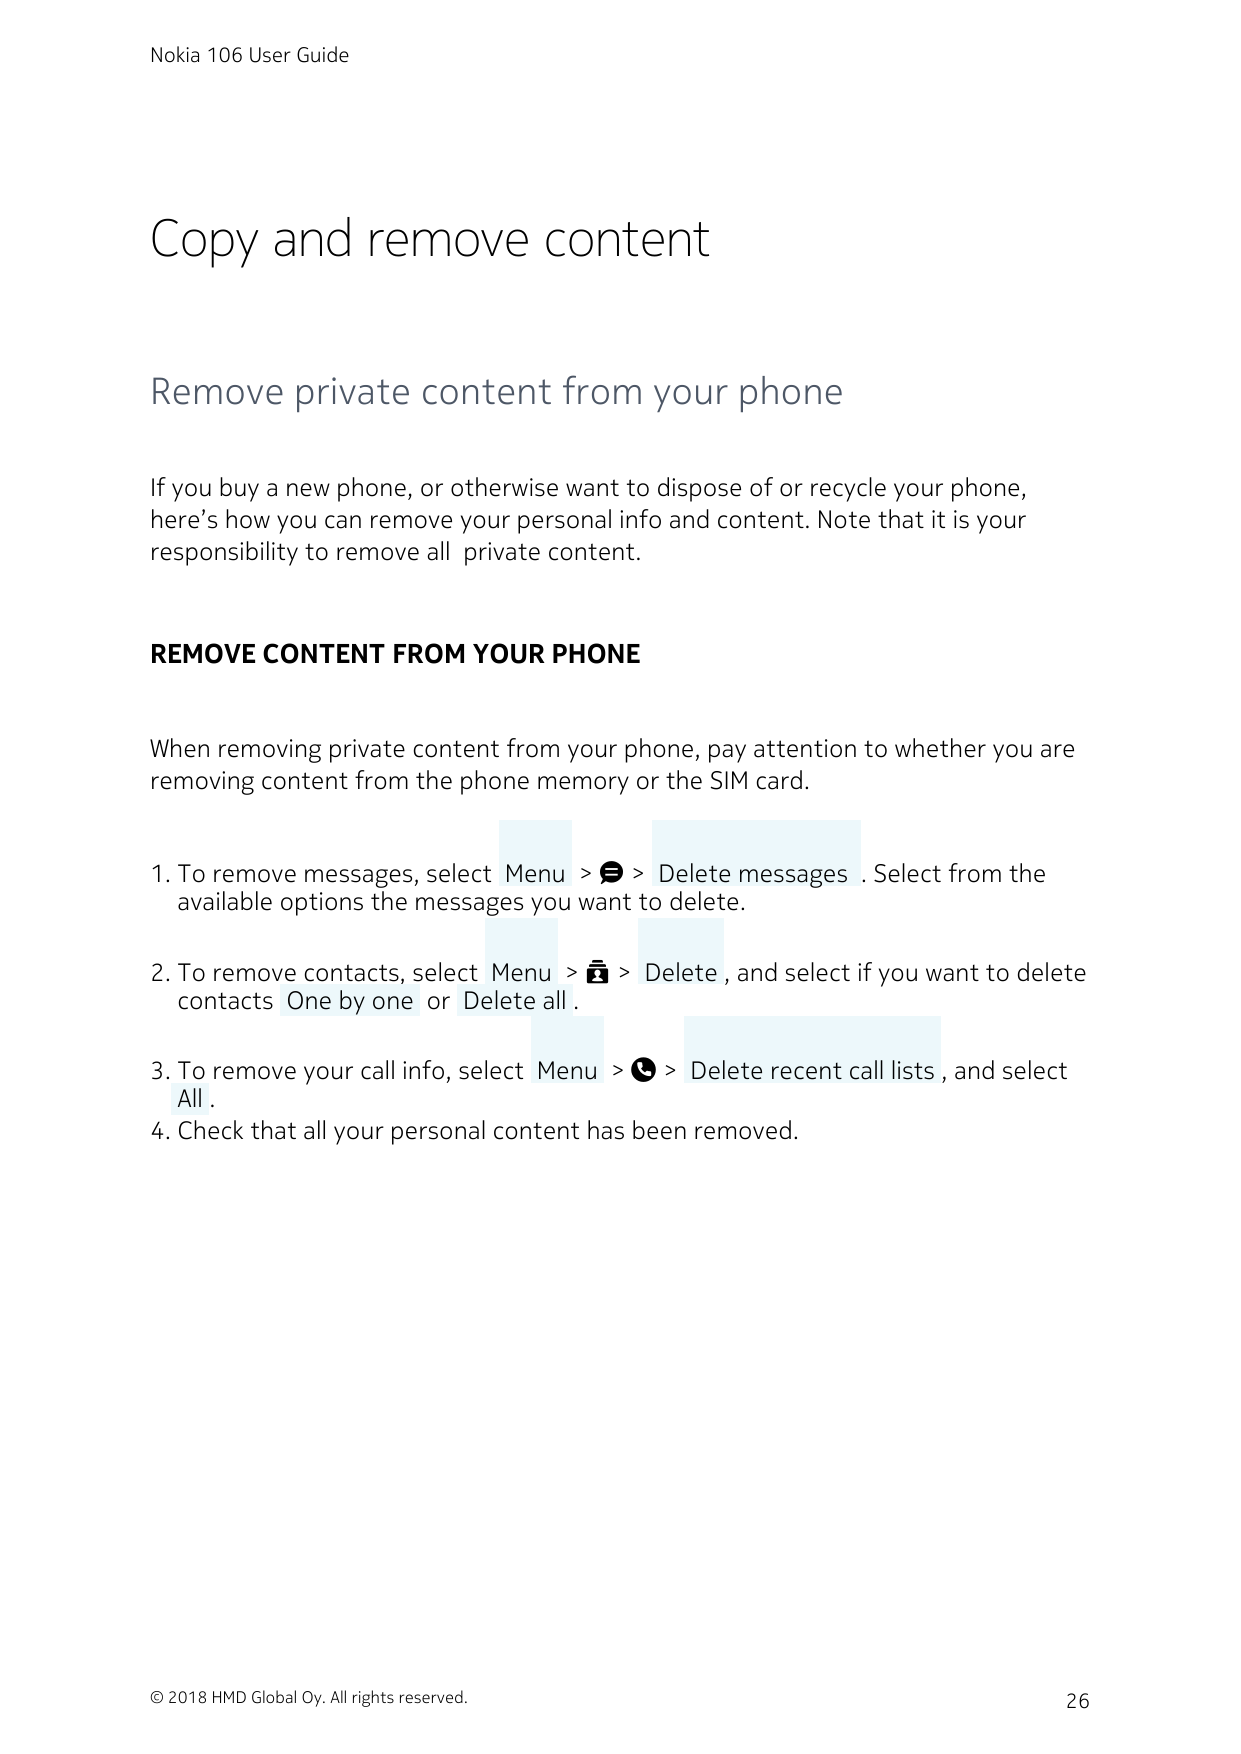 Nokia 106 User GuideCopy and remove contentRemove private content from your phoneIf you buy a new phone, or otherwise want to di